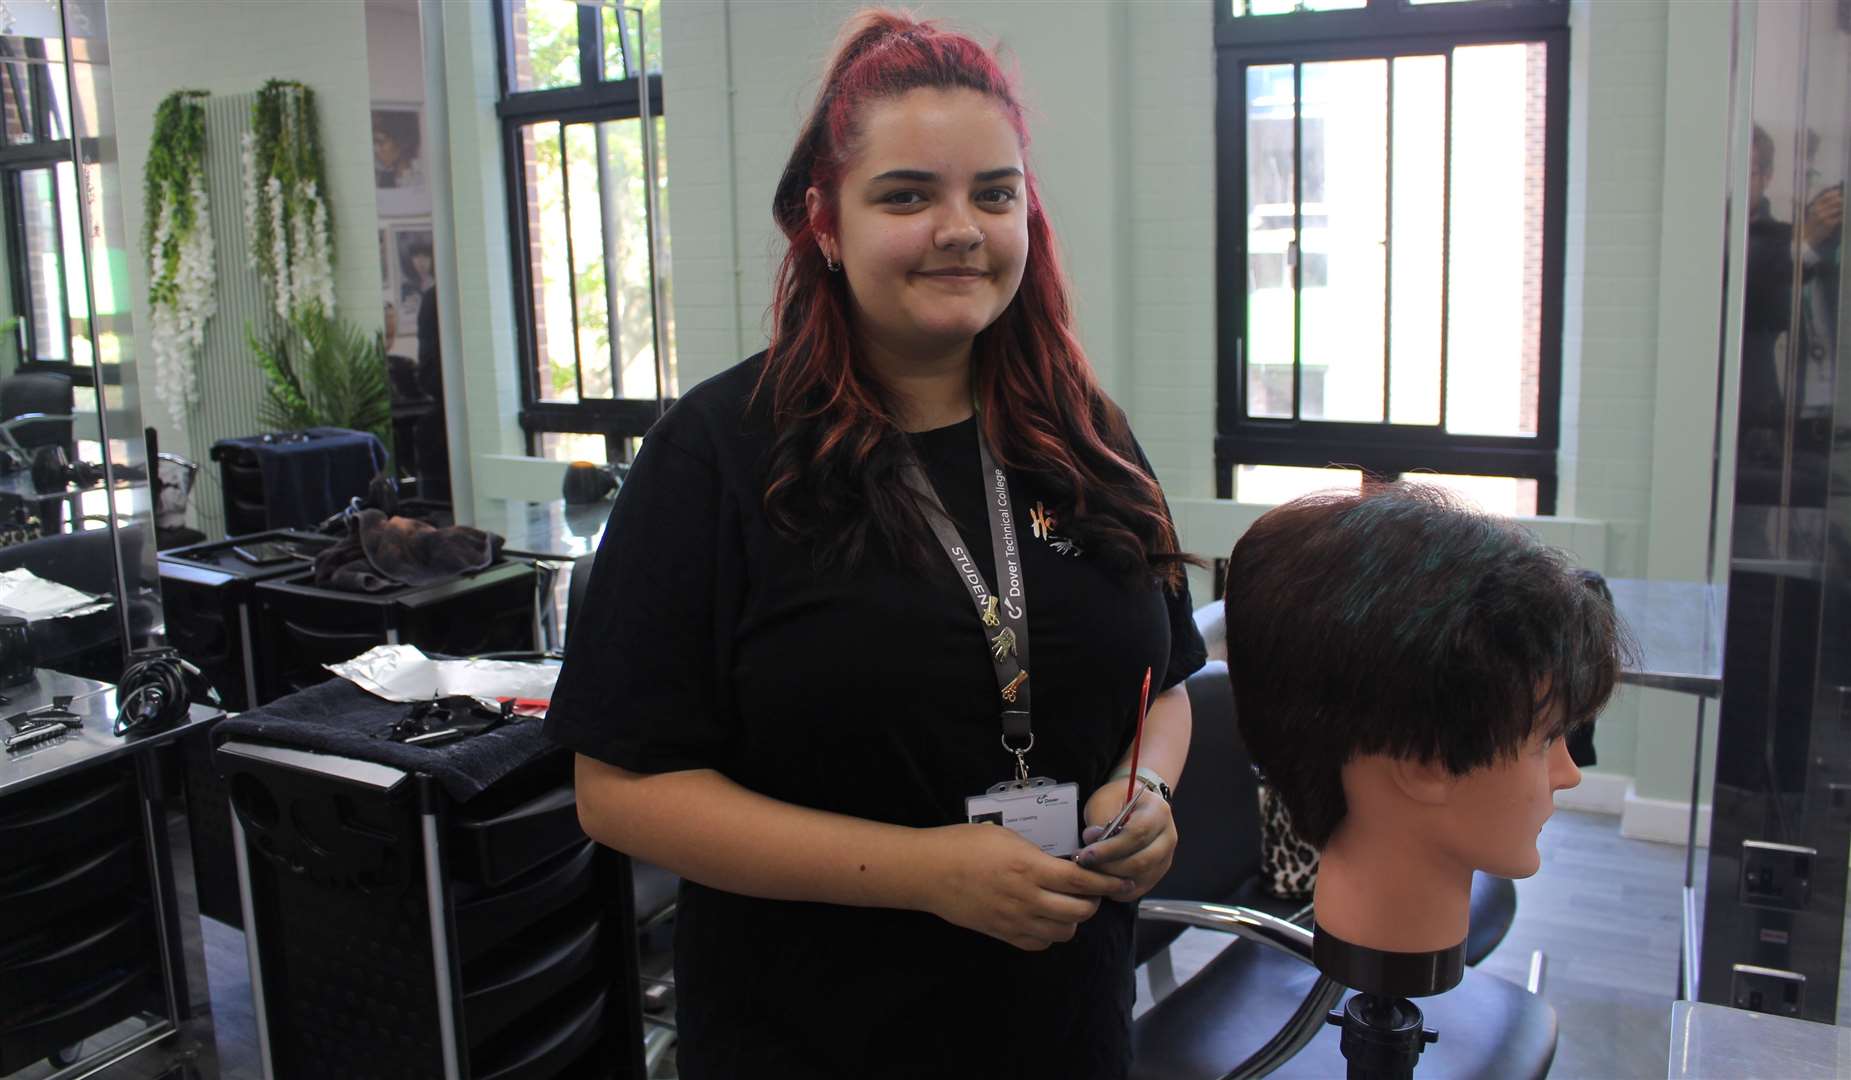 Daisie Capeling is studying Hairdressing Level 2 and says there is a real sense of freedom at the school but also a strong routine at the same time.